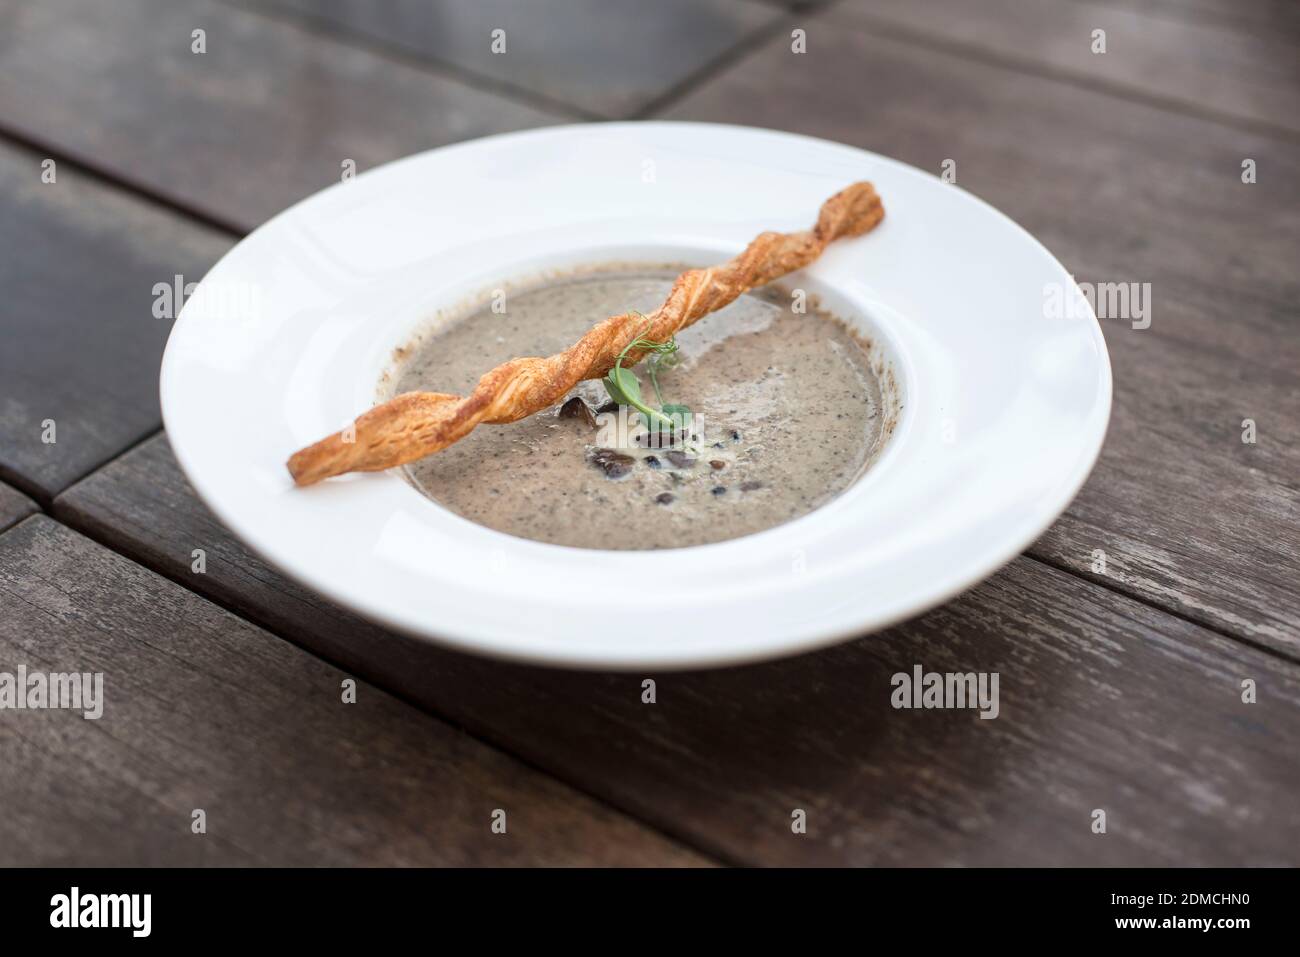 High Angle View Of Food Served In Bowl On Table Stock Photo